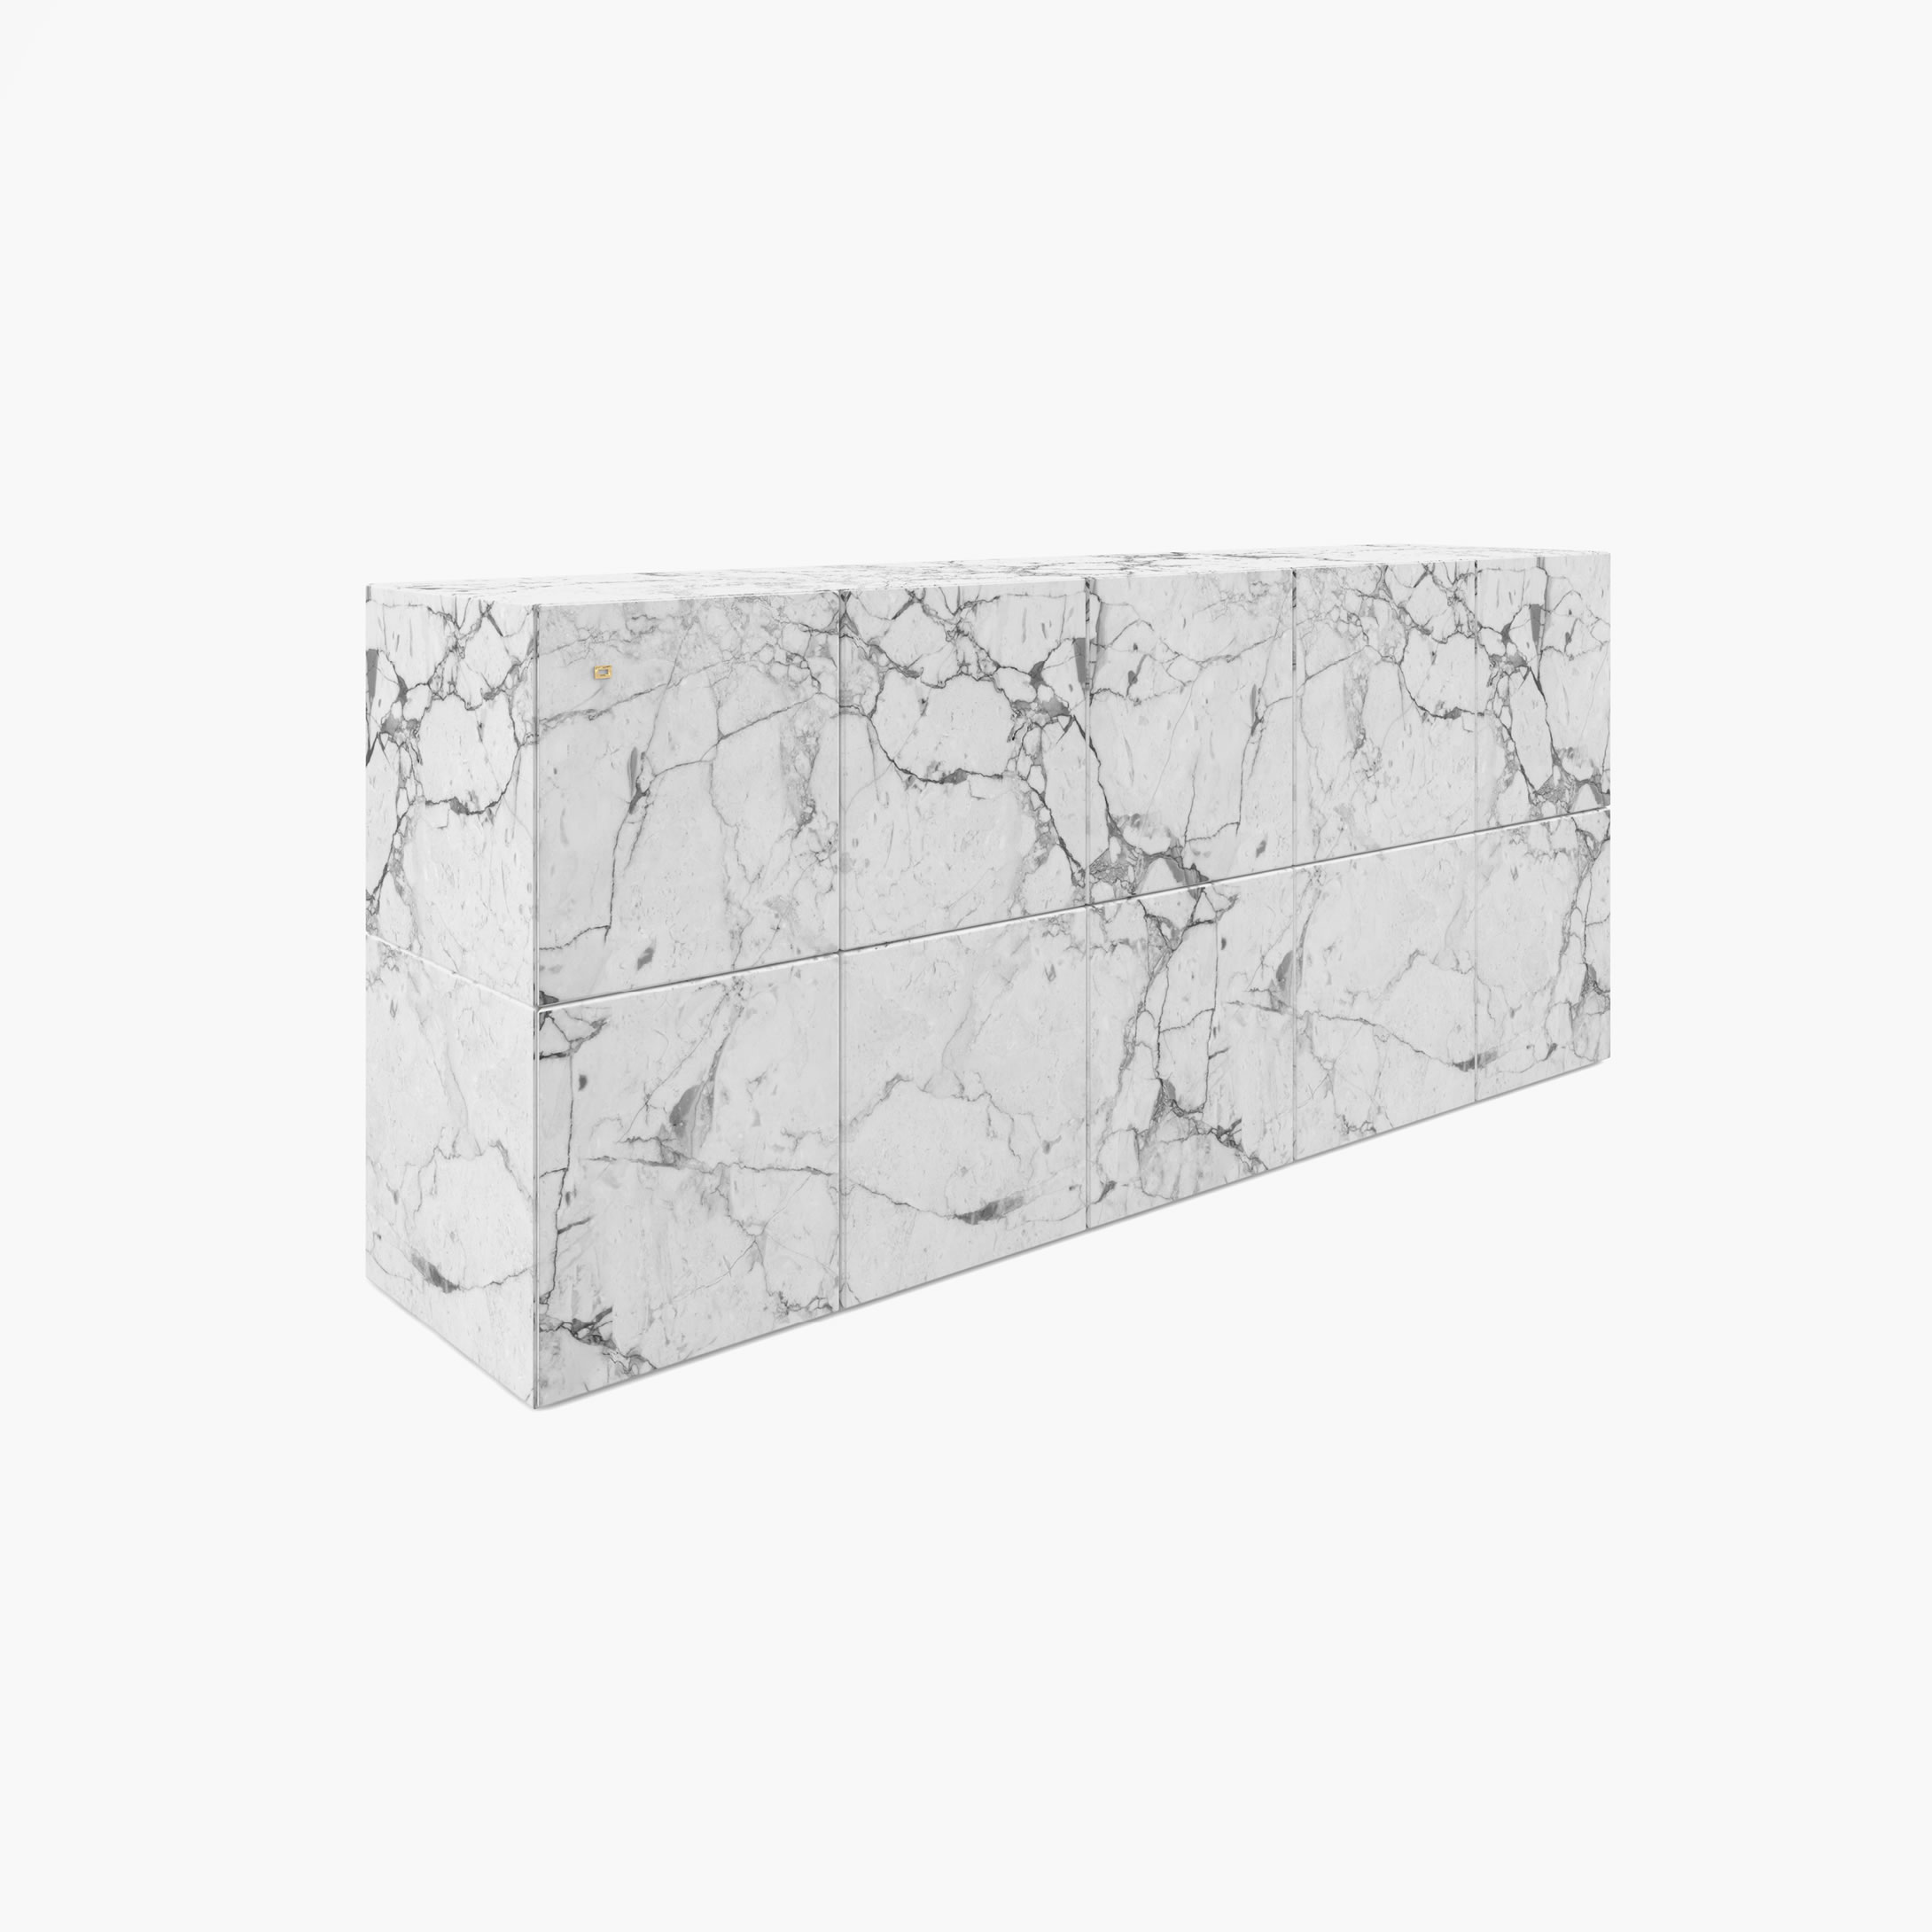 Sideboard of cubes White Arabescato Marble geometric Living Room masterpieces Consoles  Sideboards FS 21 B FELIX SCHWAKE